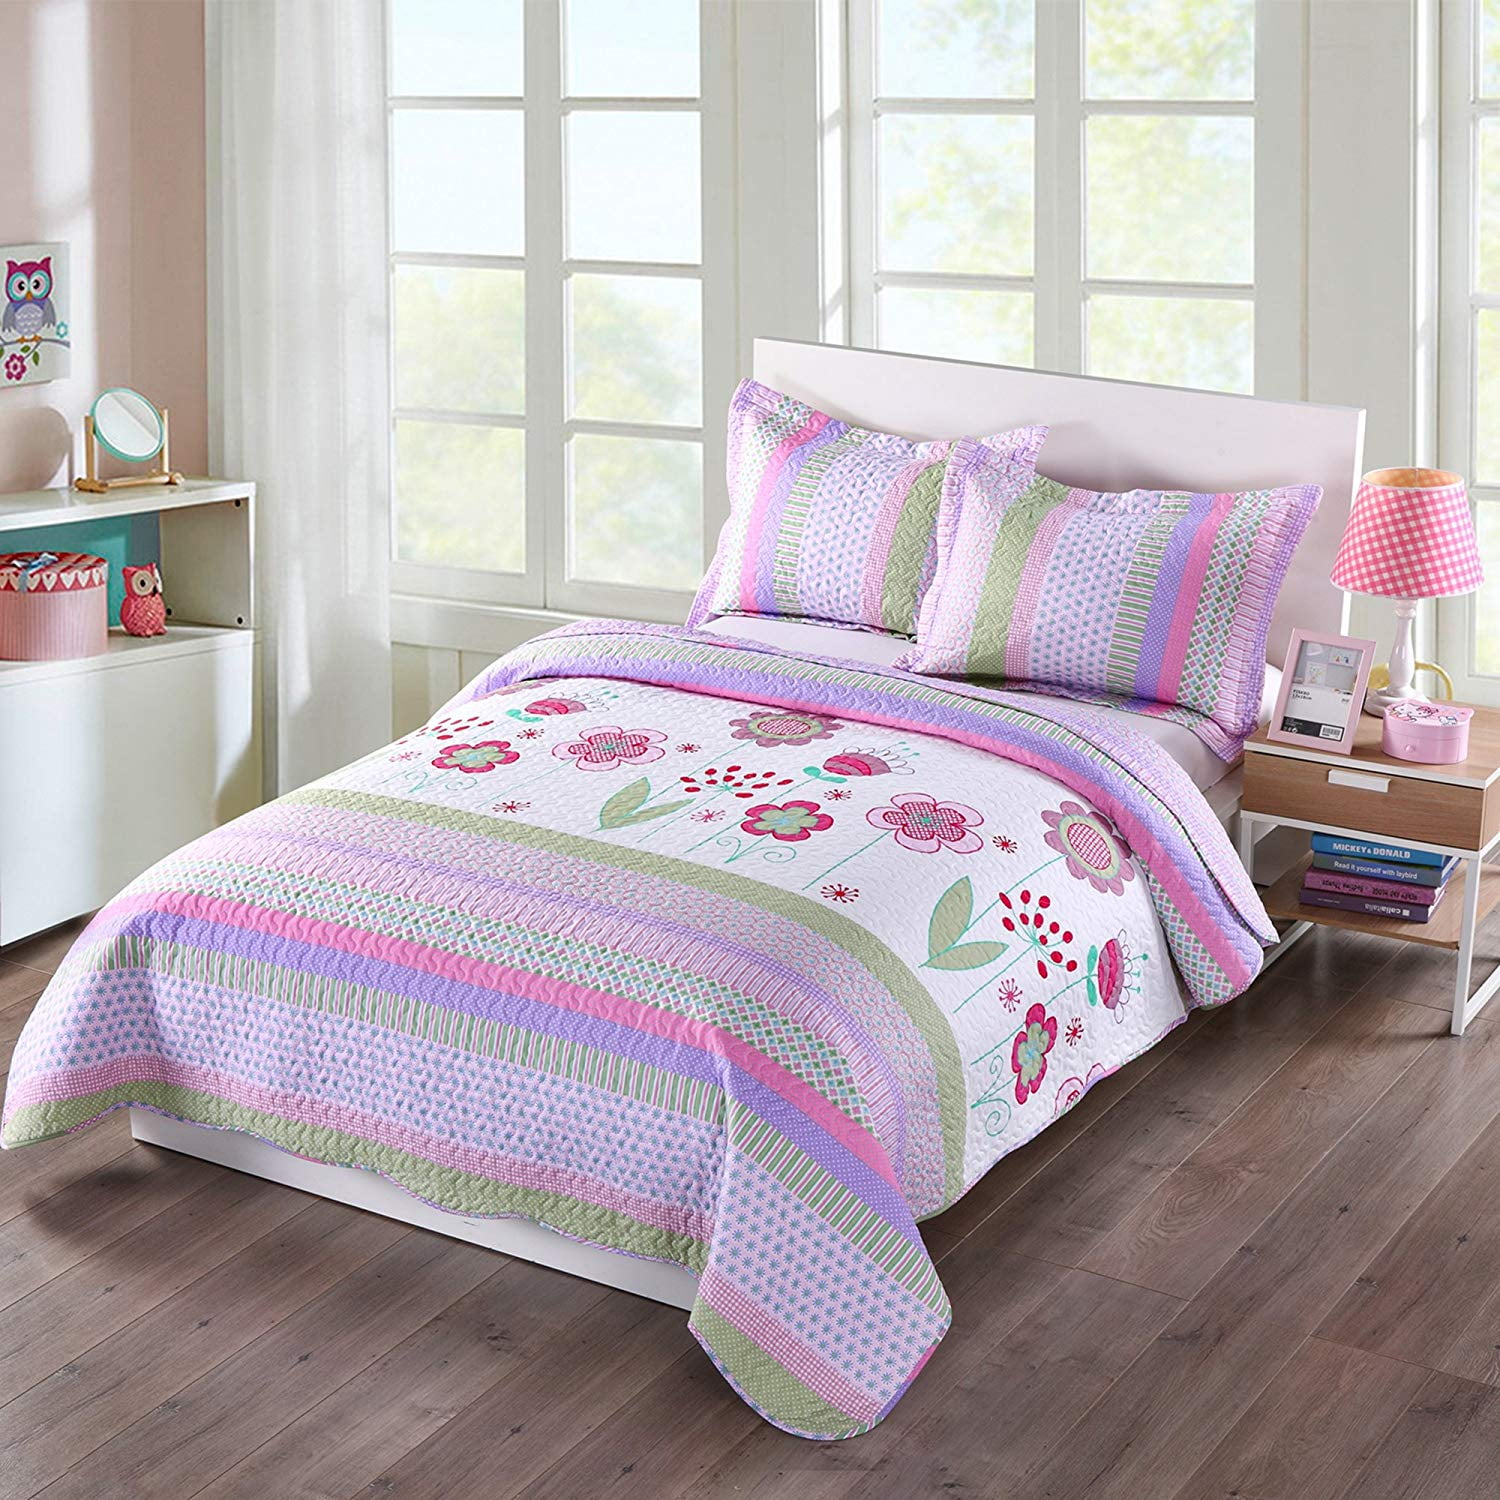 Full Size Purple Floral Striped Full MarCielo 3 Piece Kids Bedspread Quilts Set Throw Blanket for Teens Girls Bed Printed Bedding Coverlet